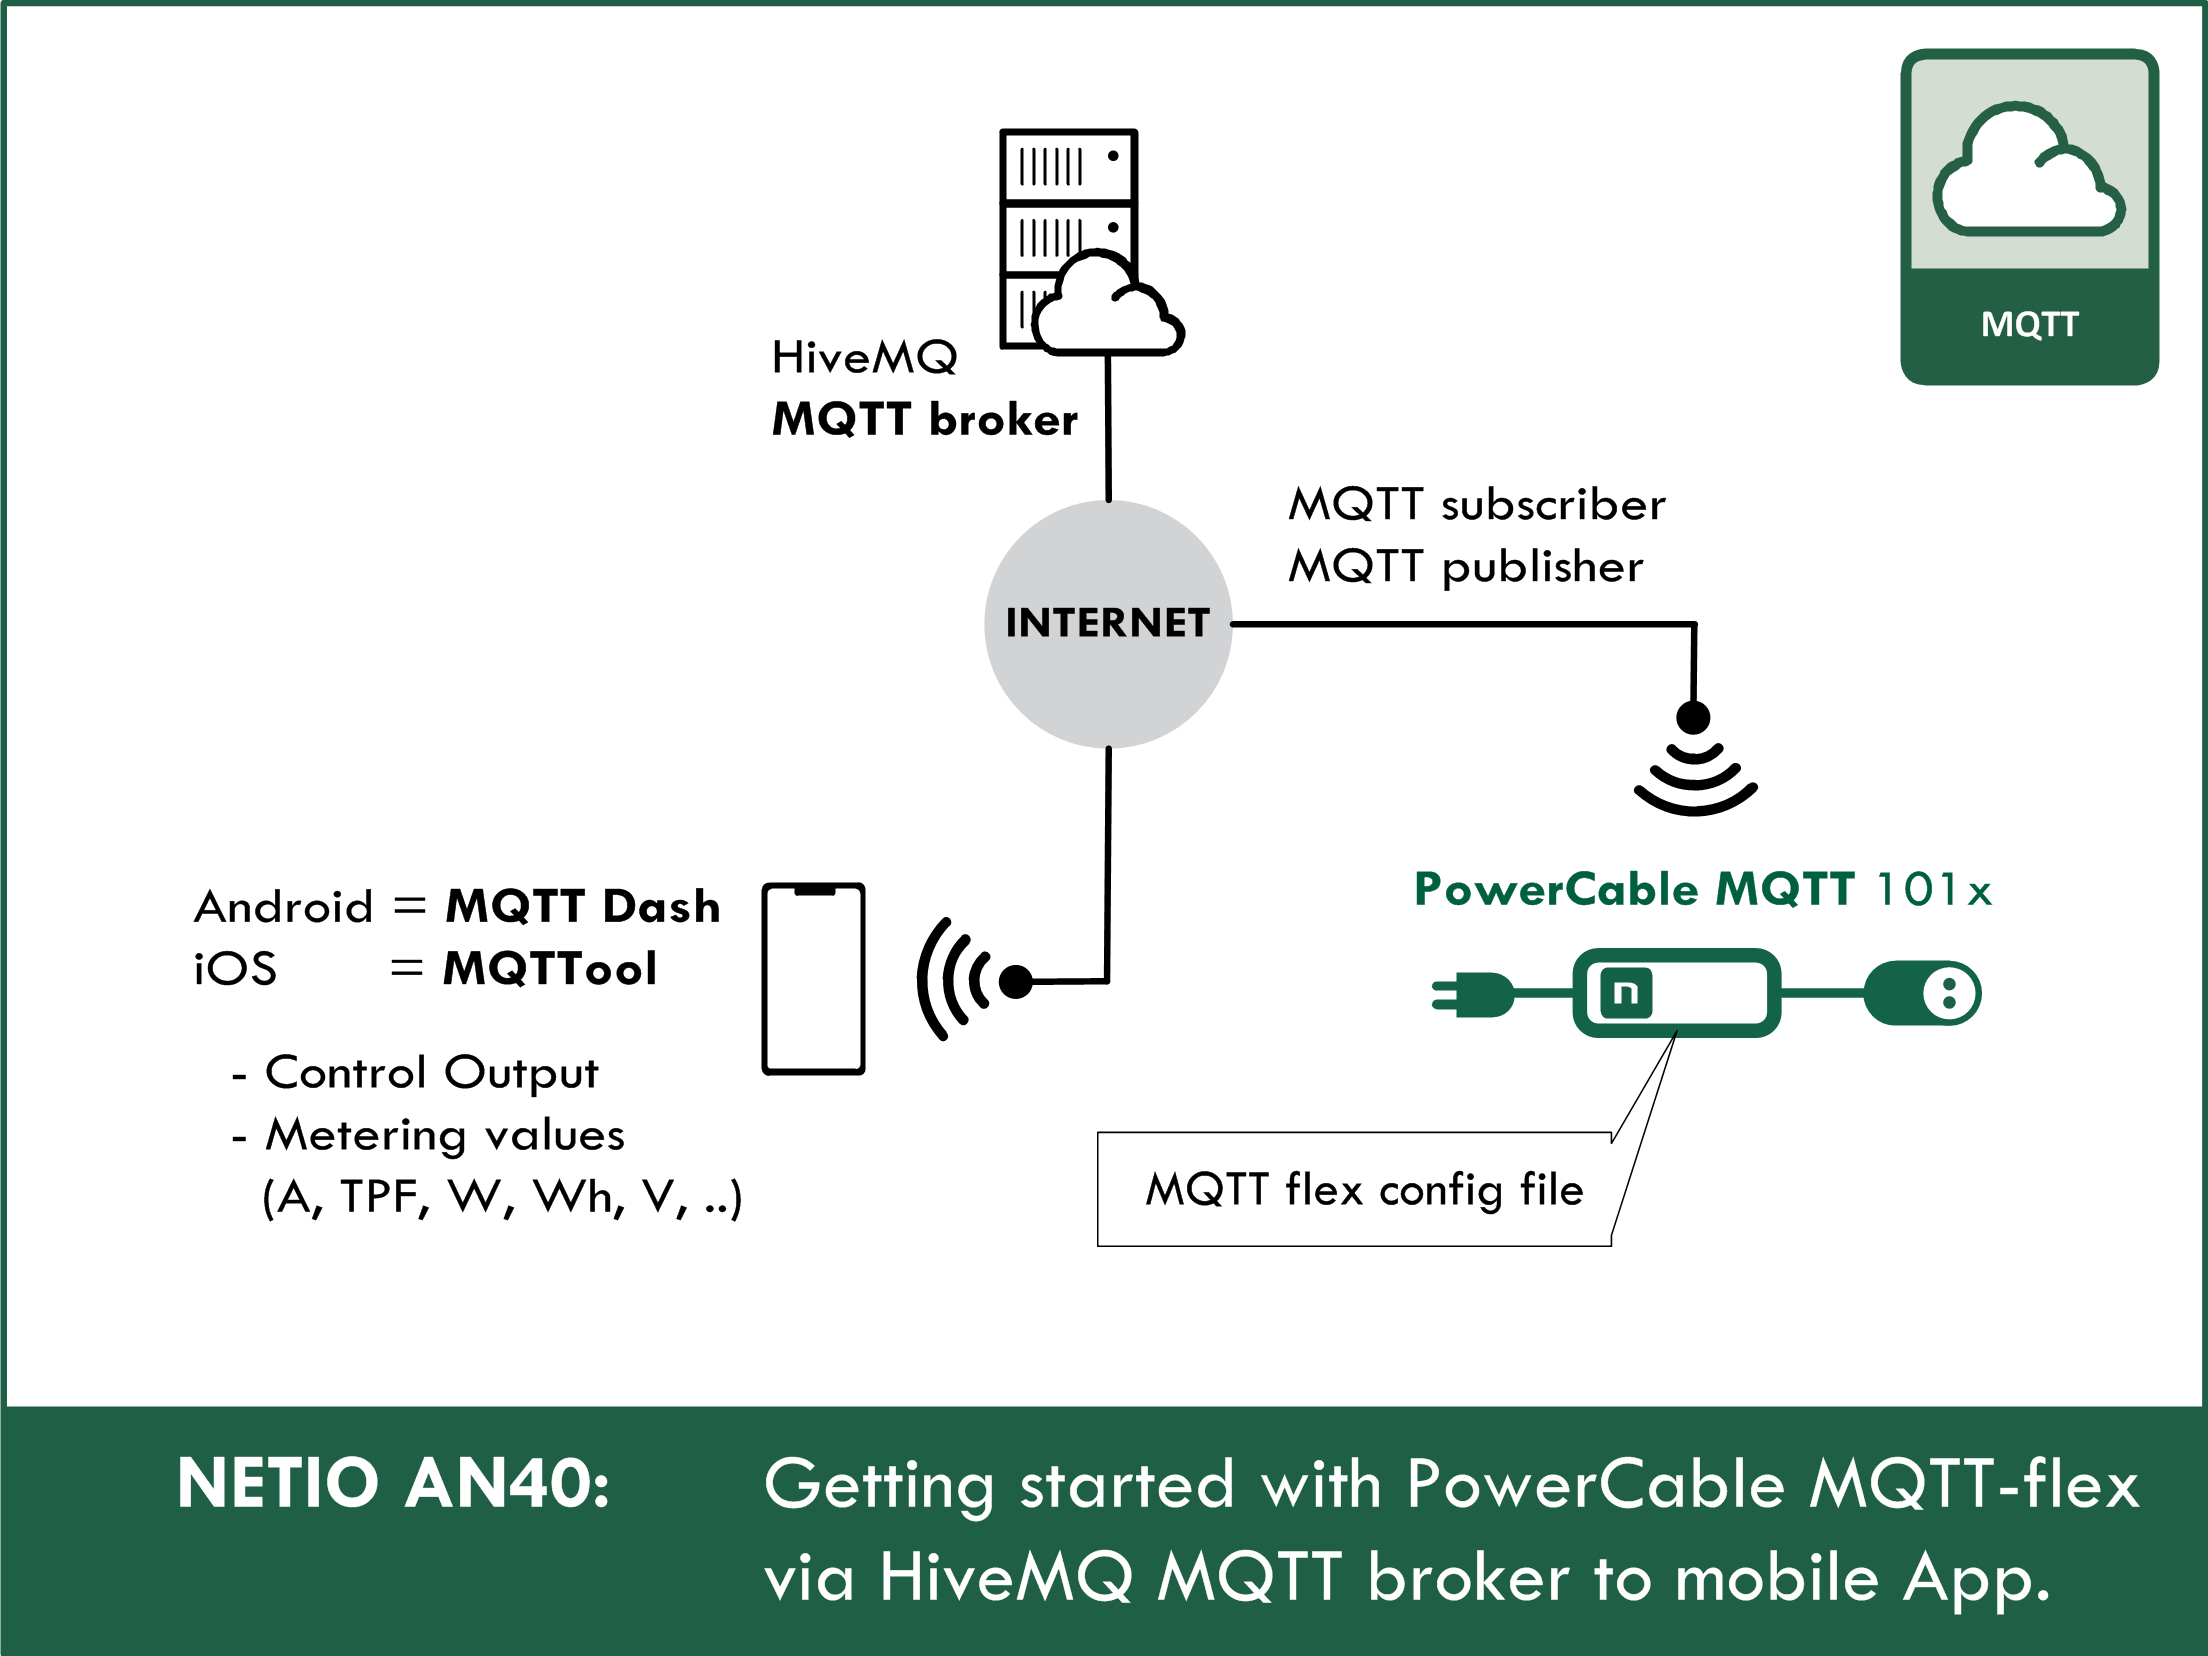 Getting started with PowerCable MQTT-flex via HiveMQ MQTT broker to mobile App.